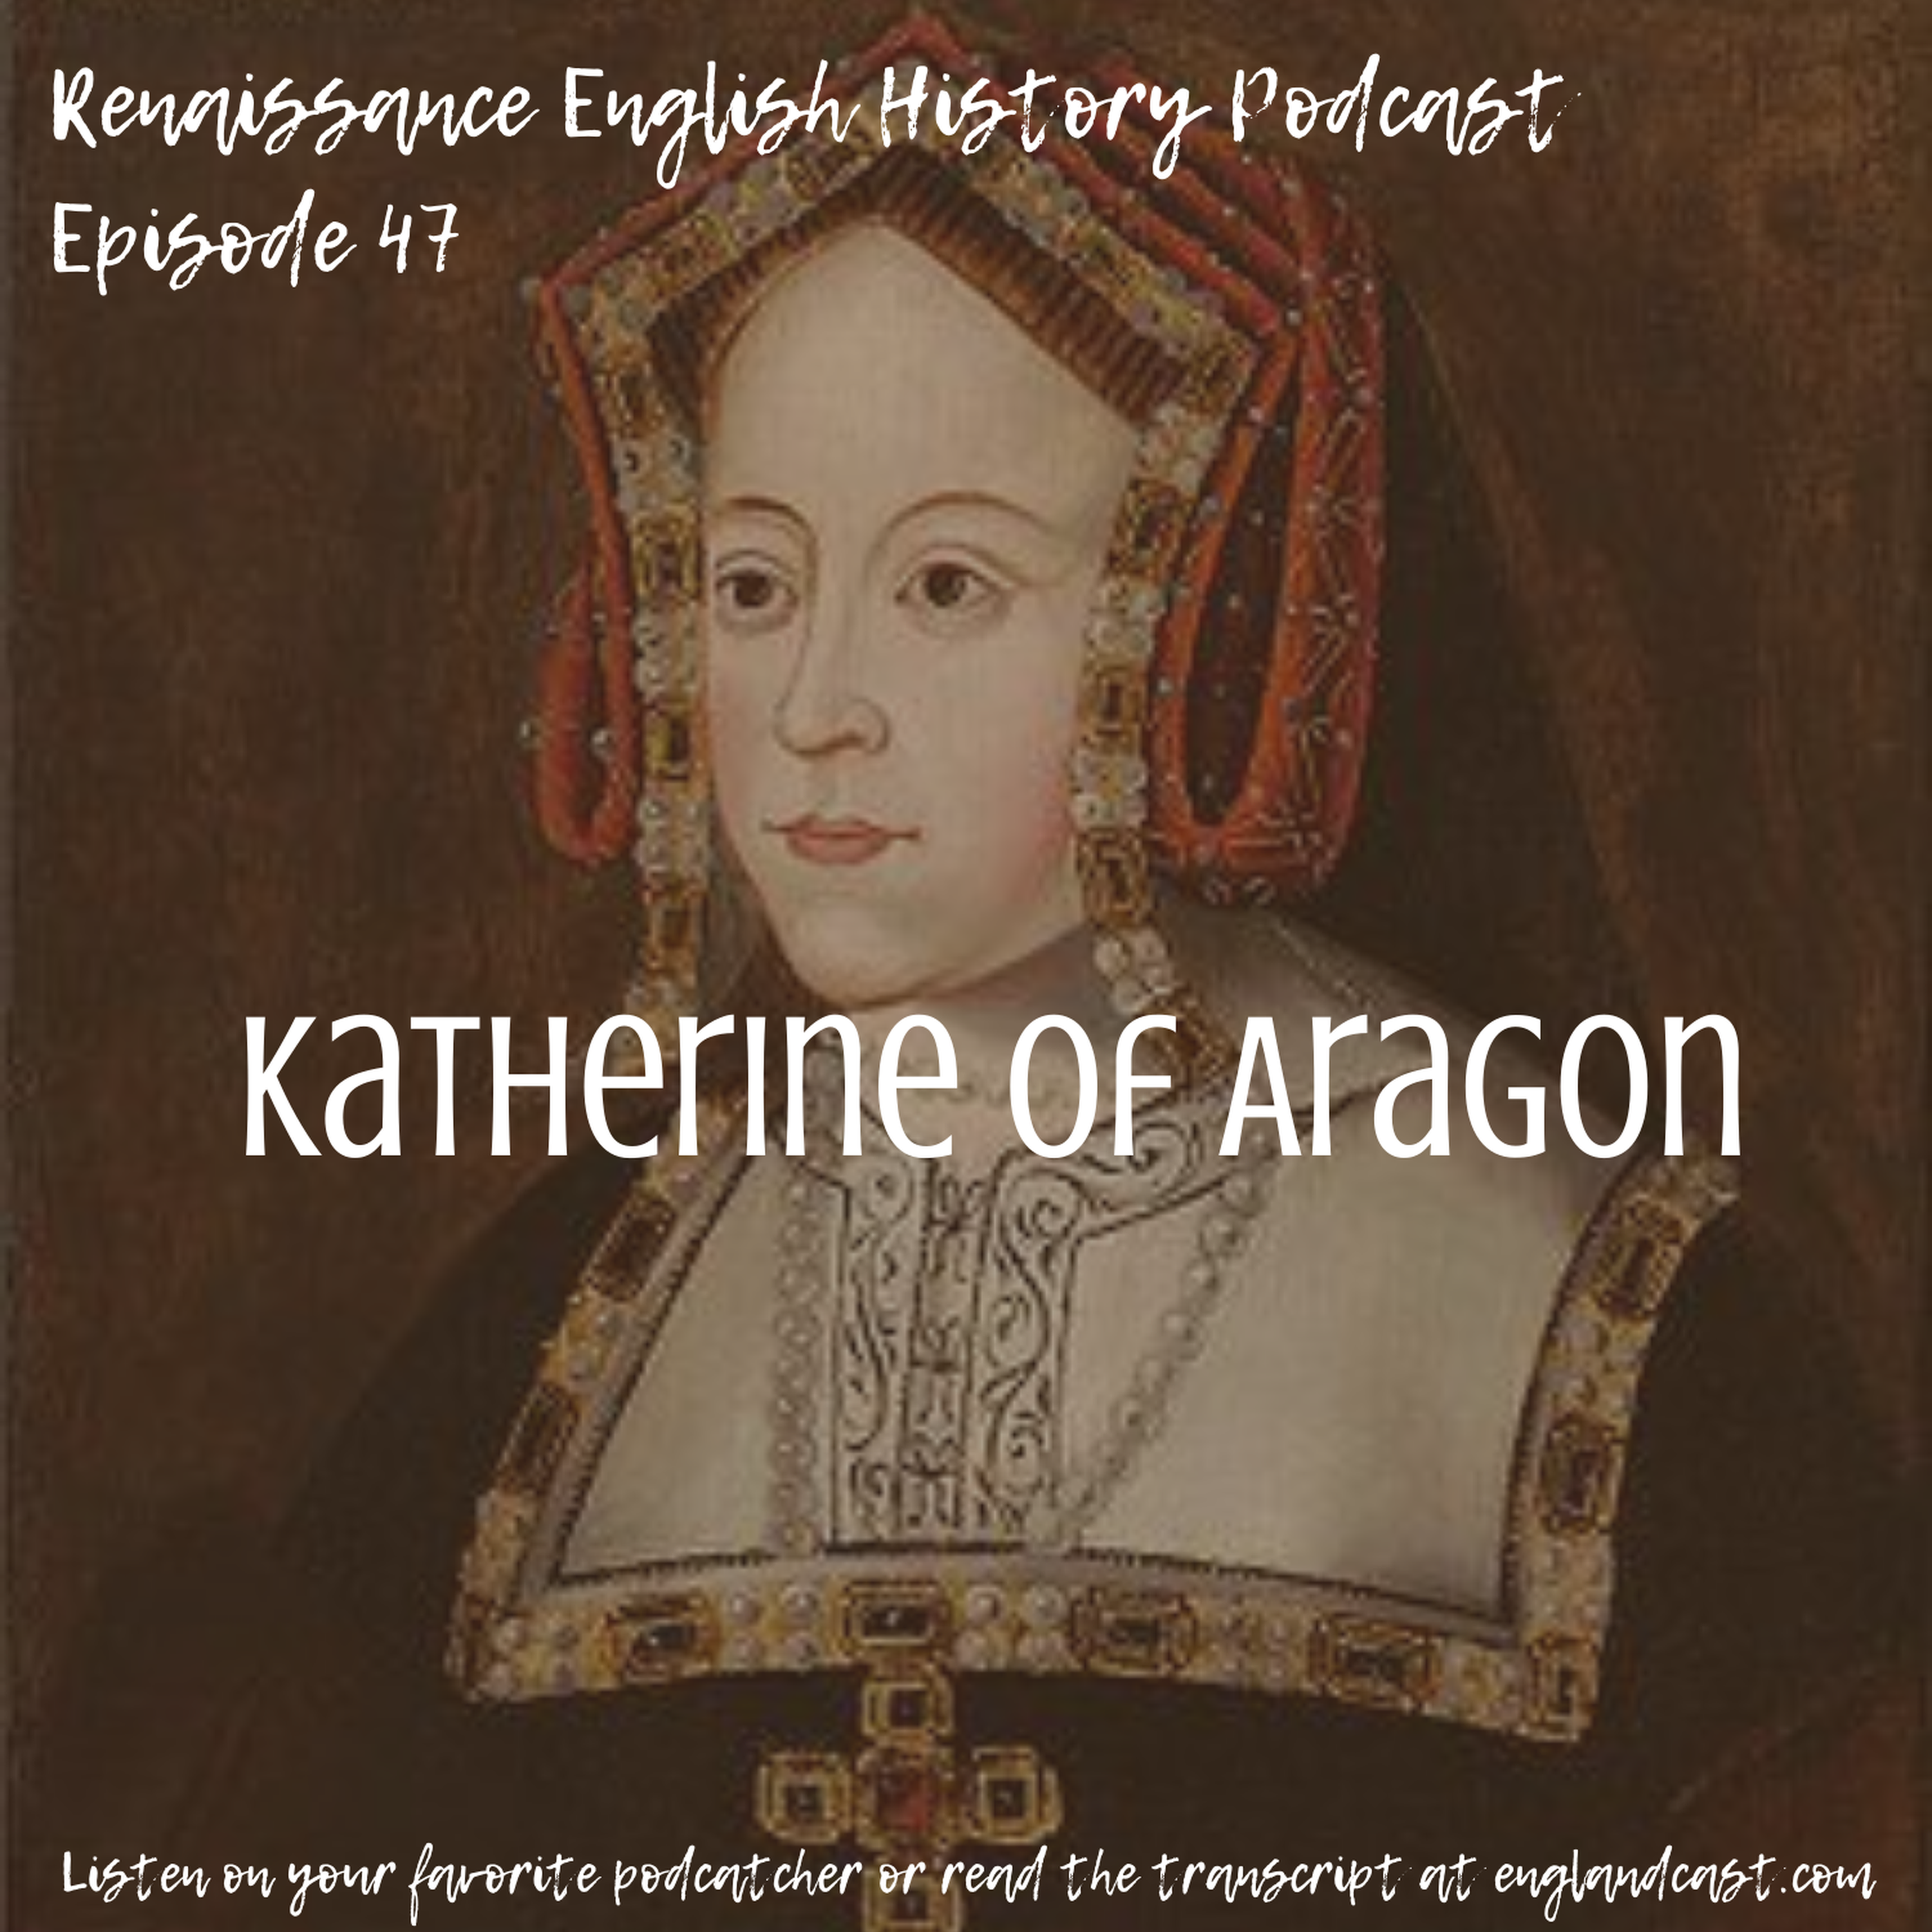 Episode 47: Tudor Times talks to us about Catherine of Aragon